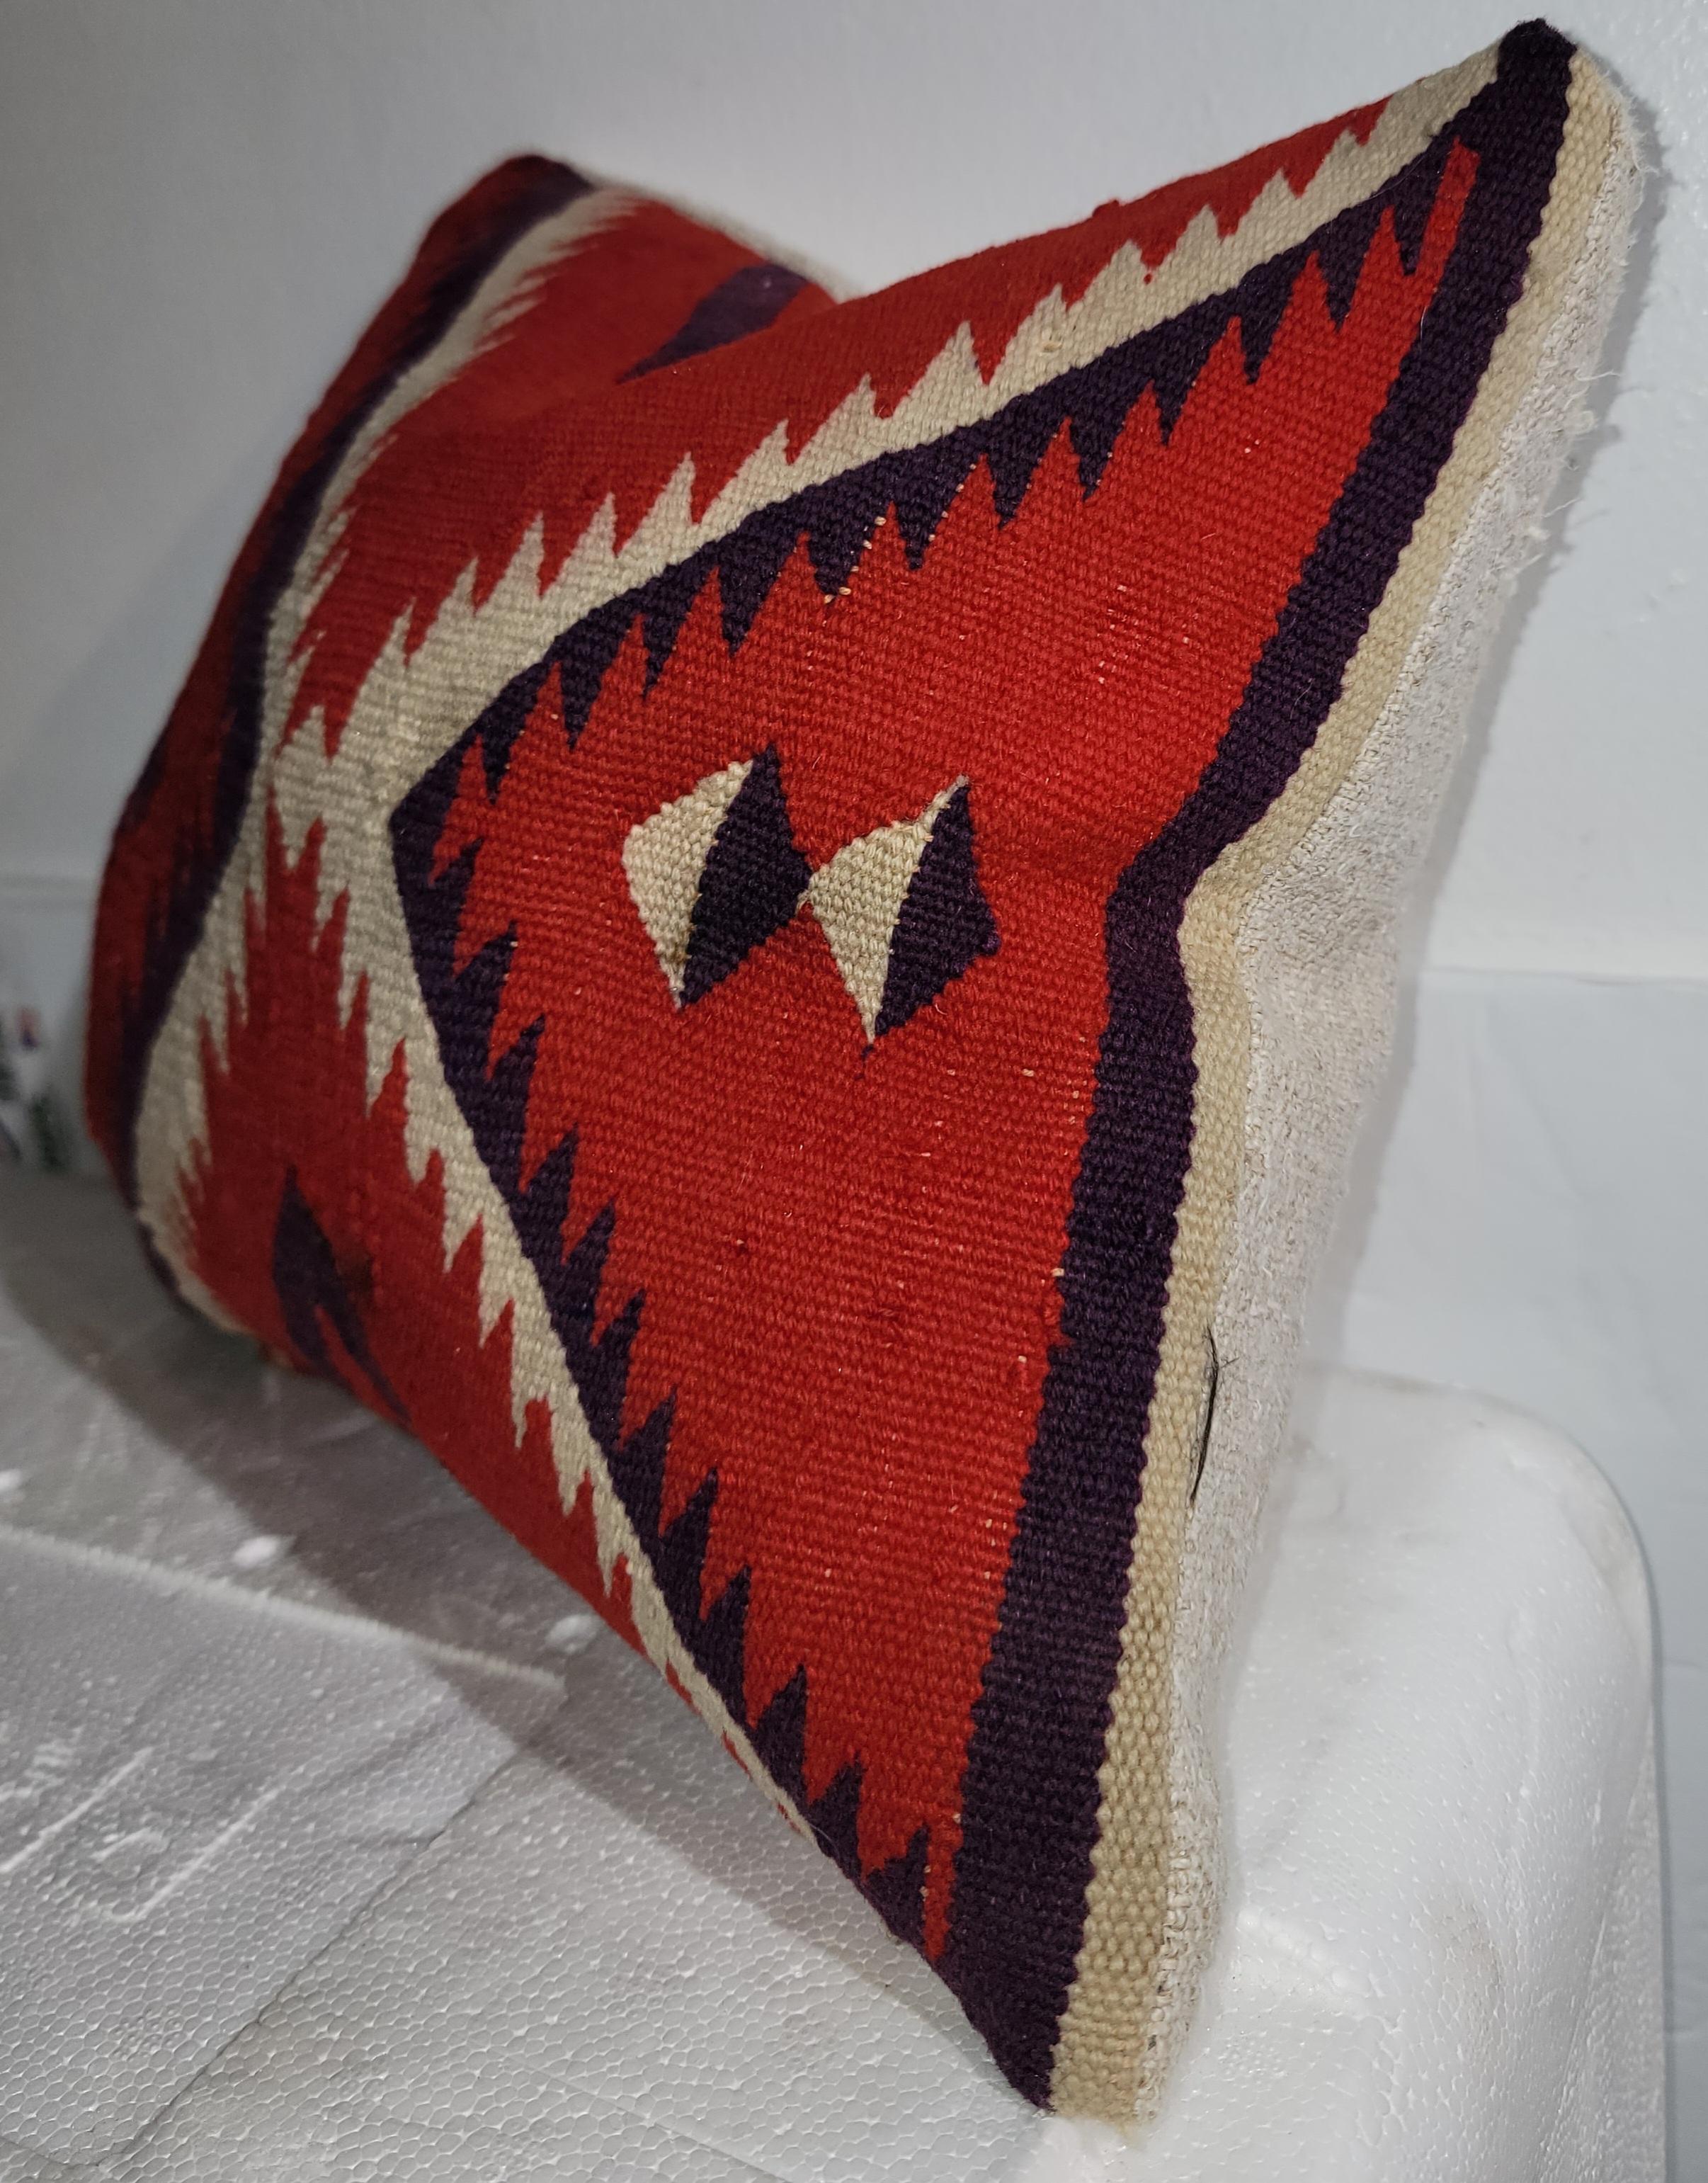 Navajo Deep Red Double Eye Dazzler Pillow Sampler.

This pillow was made from a larger double eye pillow. The blueish and off white jigsaw patter flows through the center of the pillow from the corners meeting at a single pint in the center